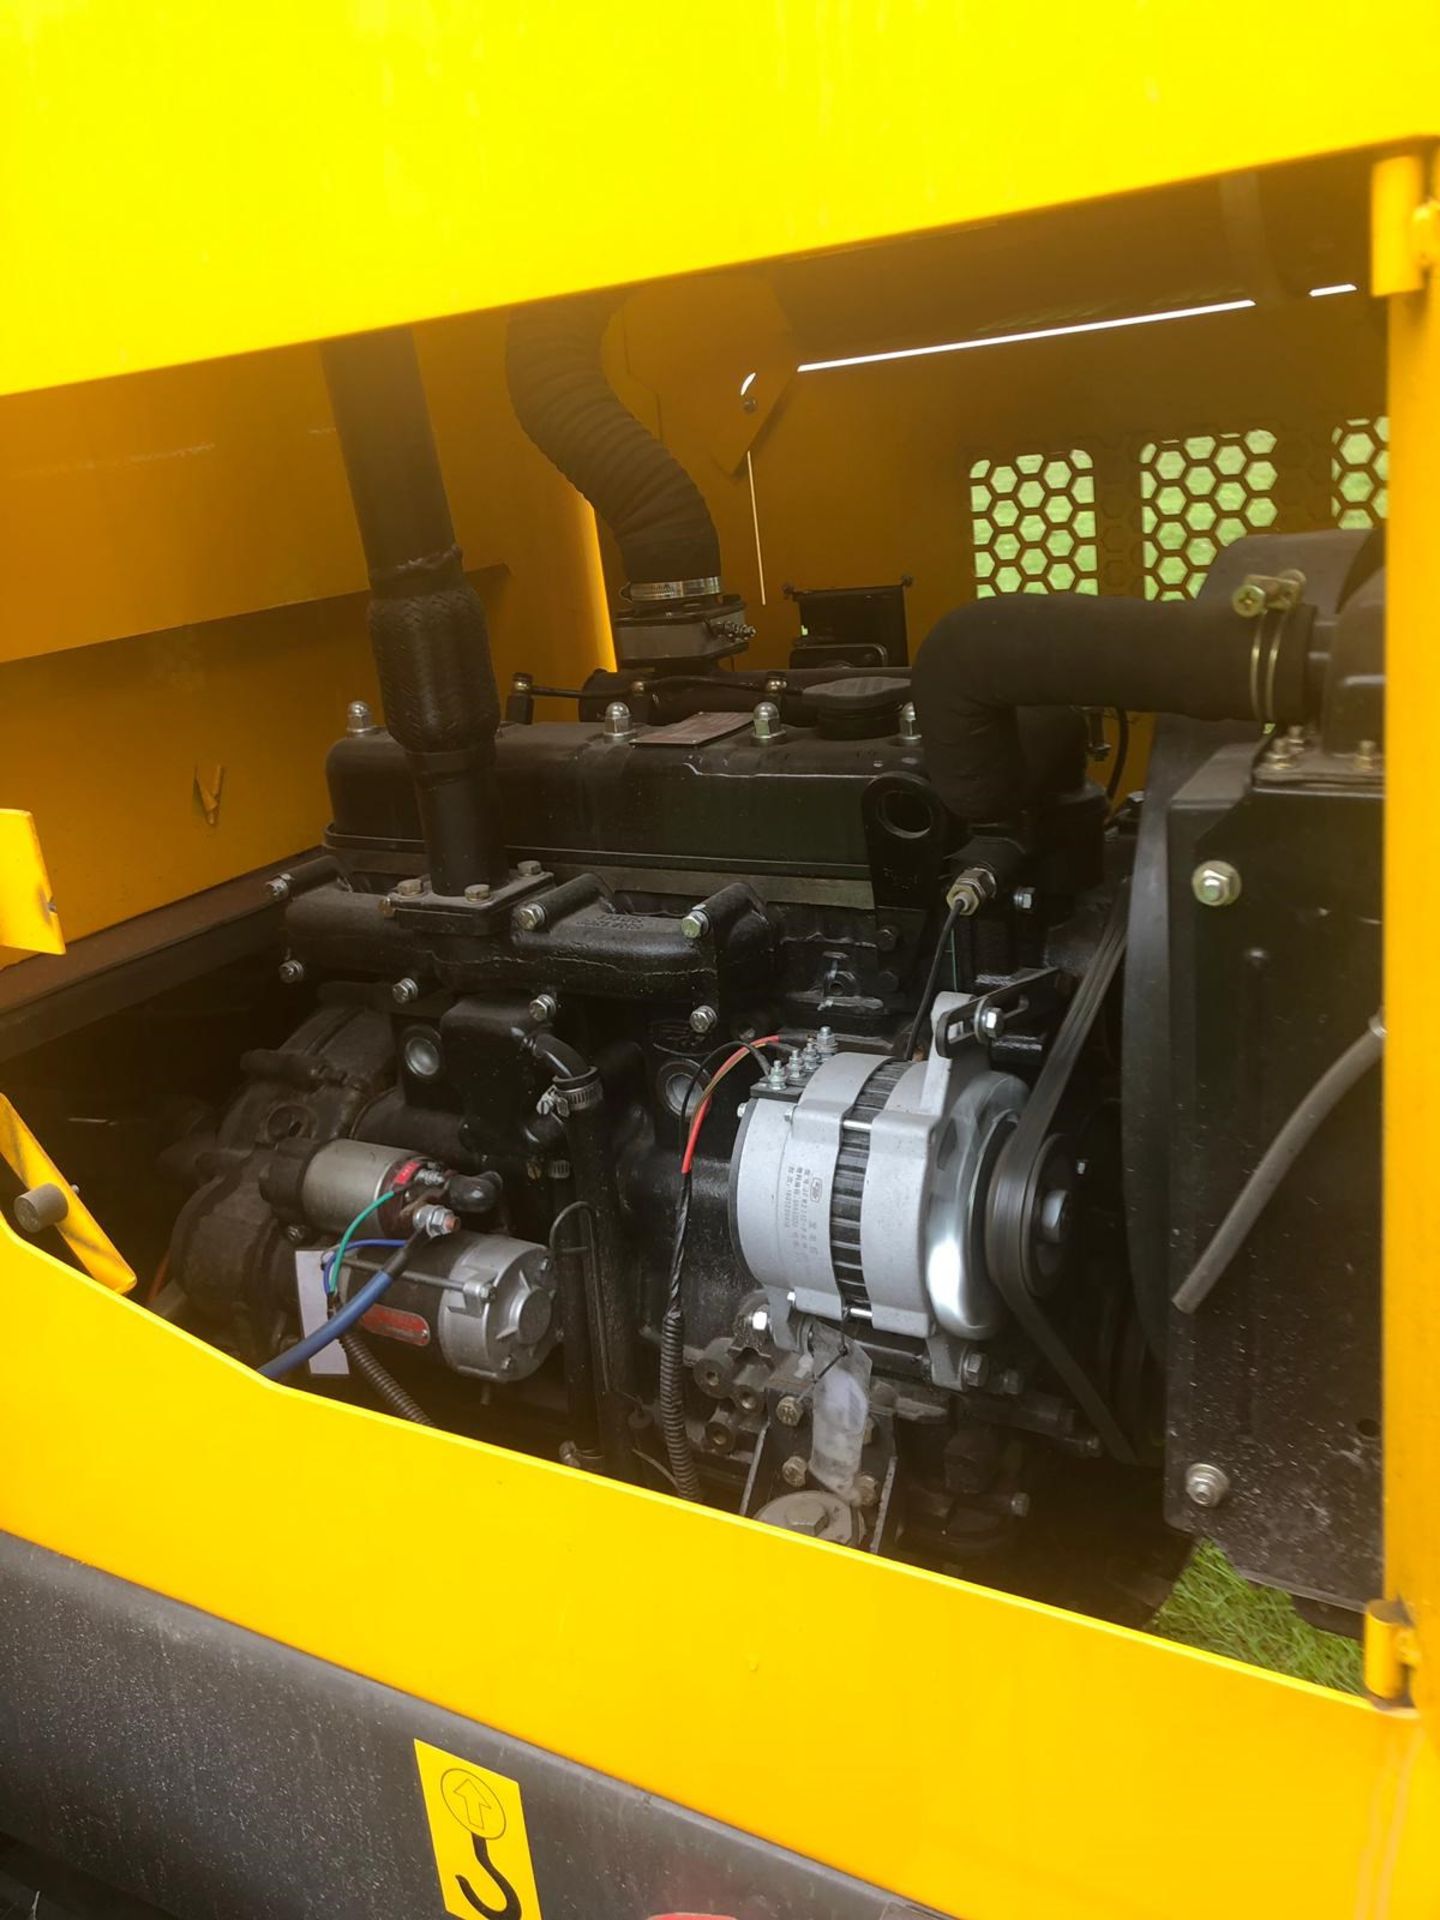 2019 BRAND NEW AND UNUSED ATTACK 1610 WHEEL LOADER, RUNS WORKS AND LIFTS *PLUS VAT* - Image 6 of 9